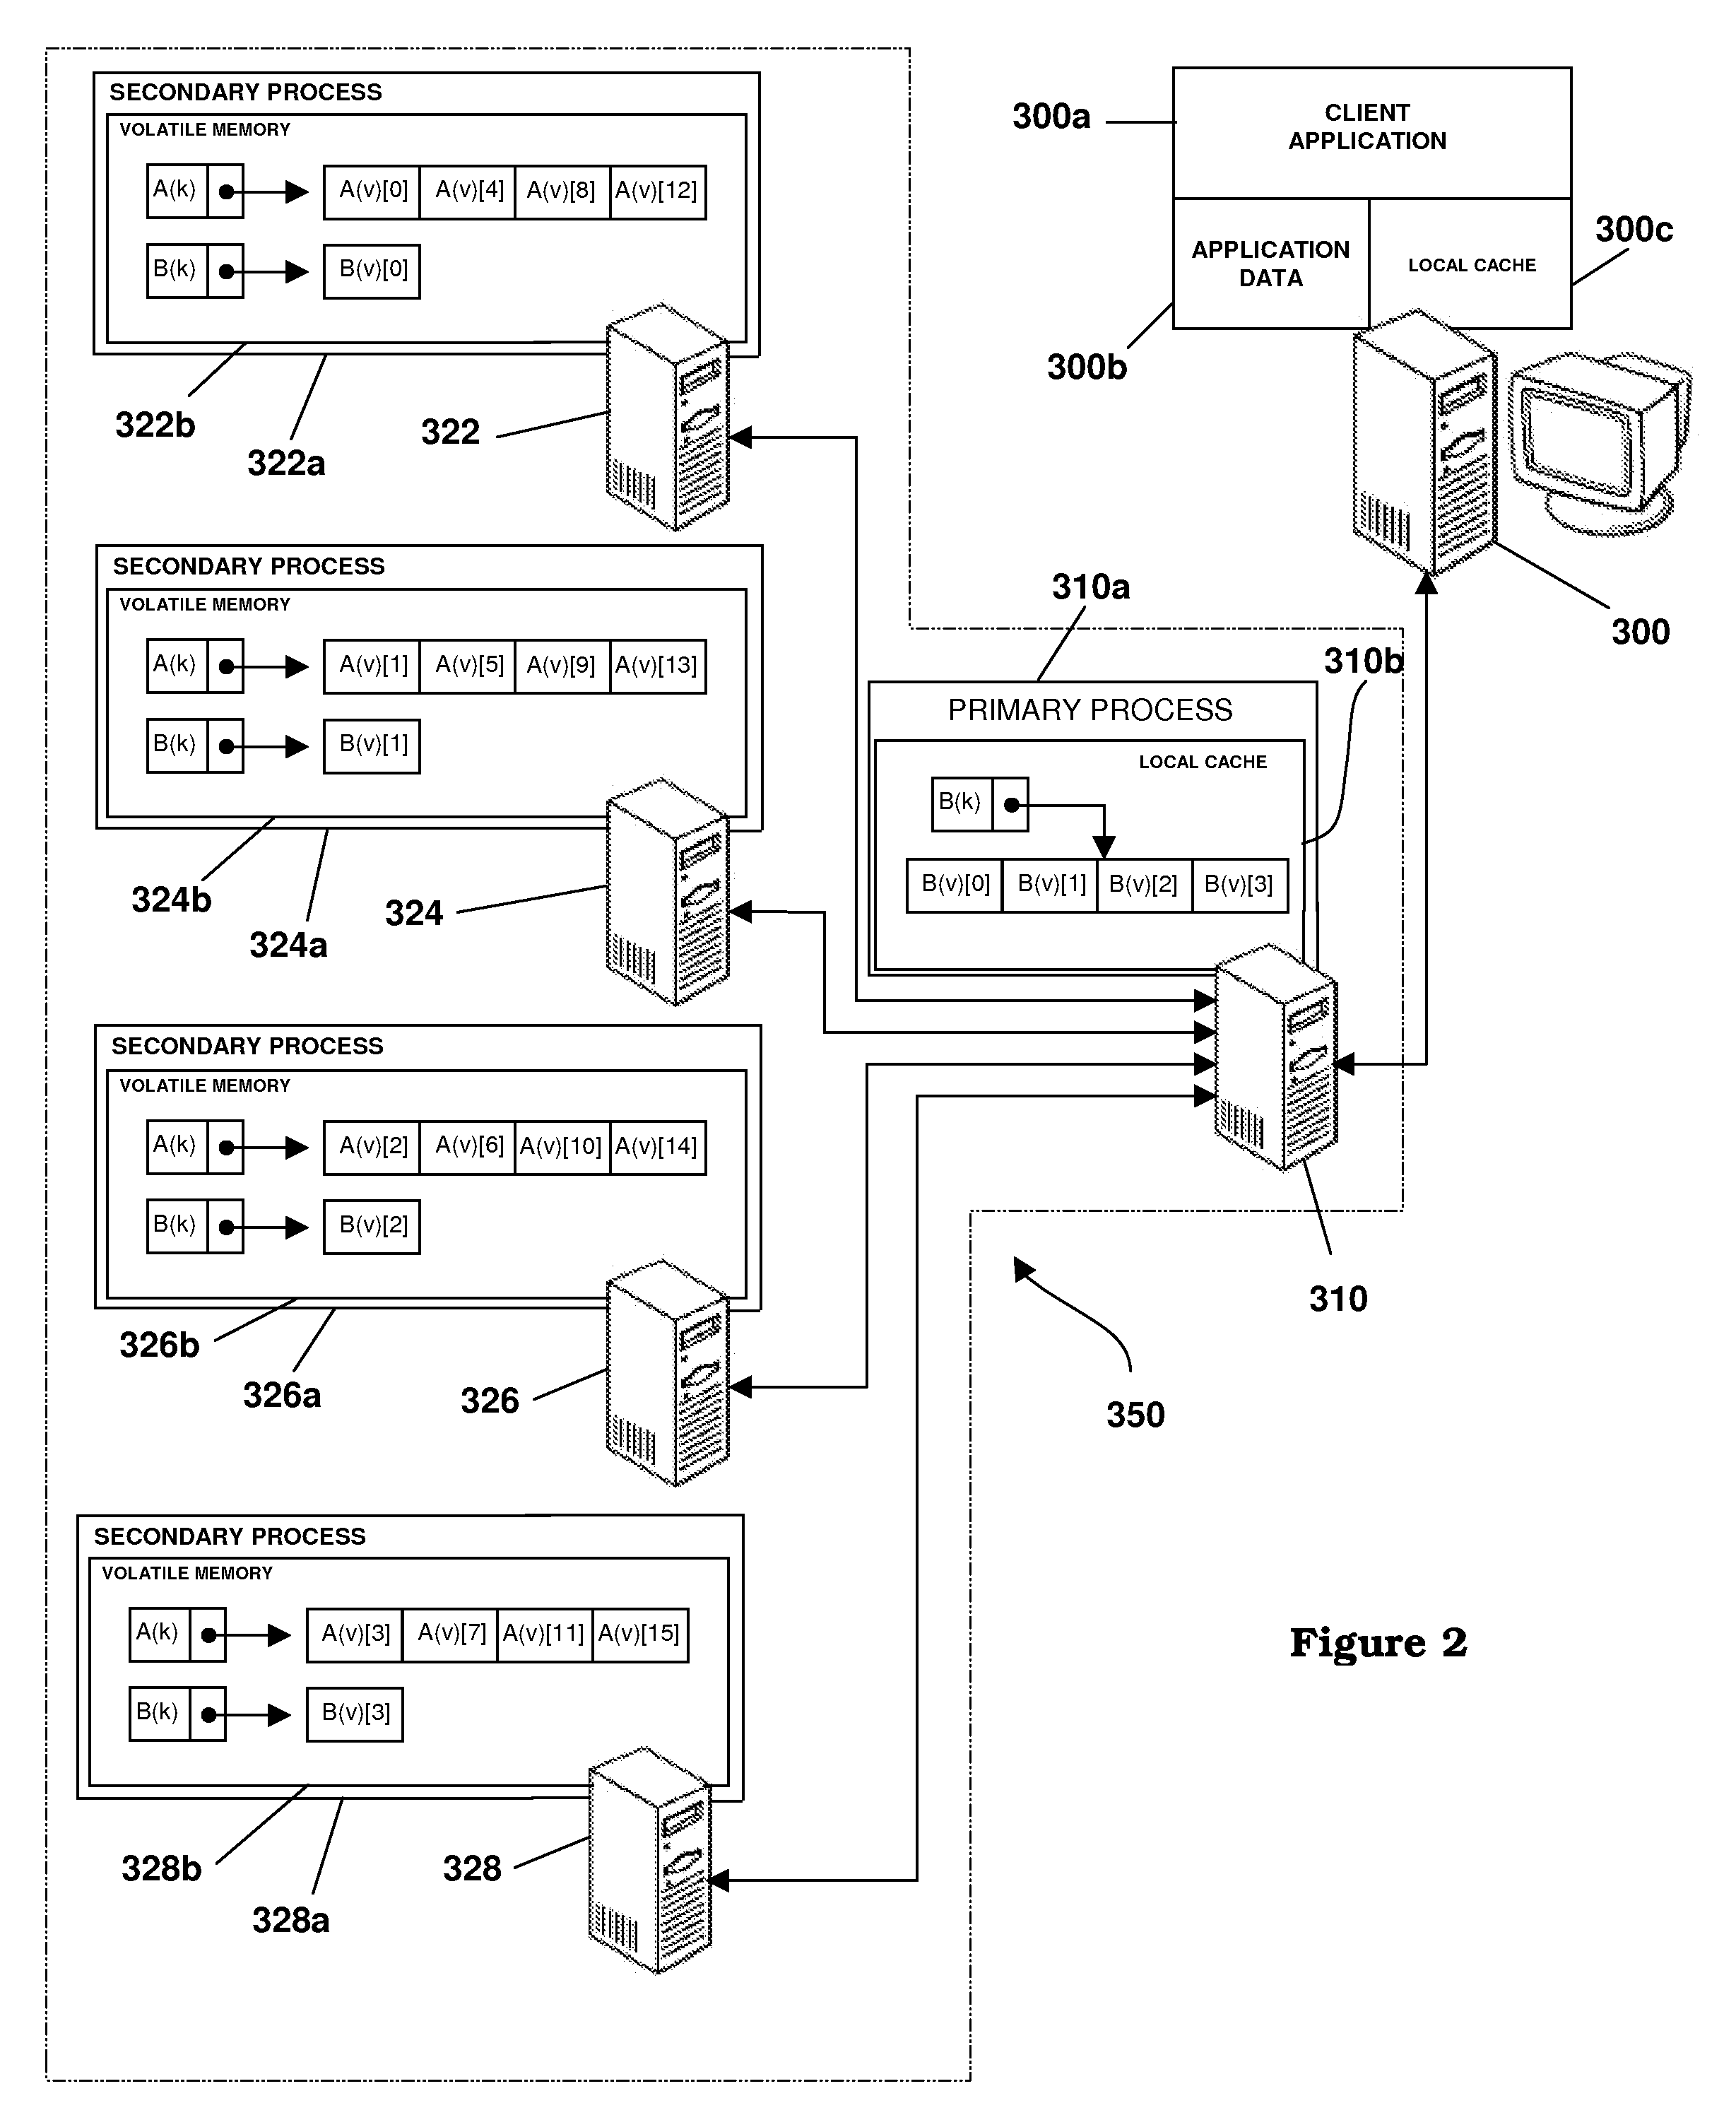 Map Based Striping of Data in a Distributed Volatile Memory Environment